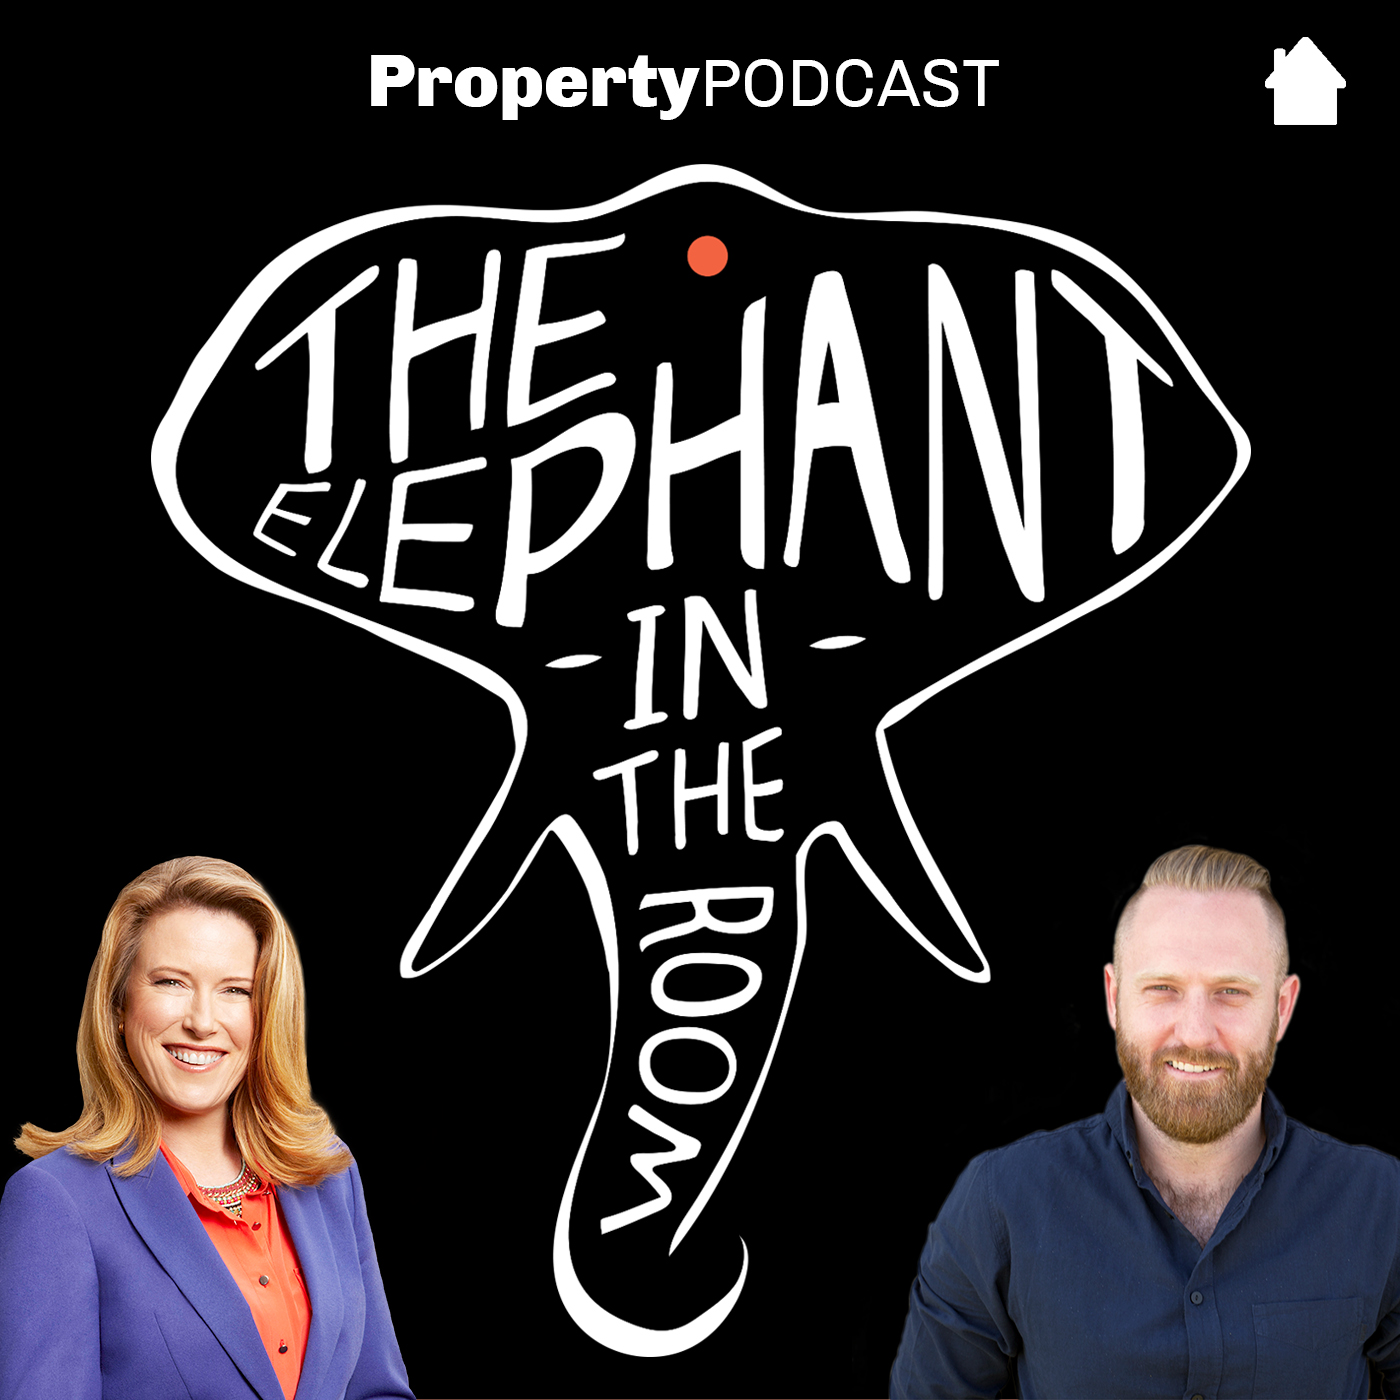 Ep 54 - Haesley Cush | Why auctions don't fly in Brisbane but unrenovated 'Queenslanders' do!